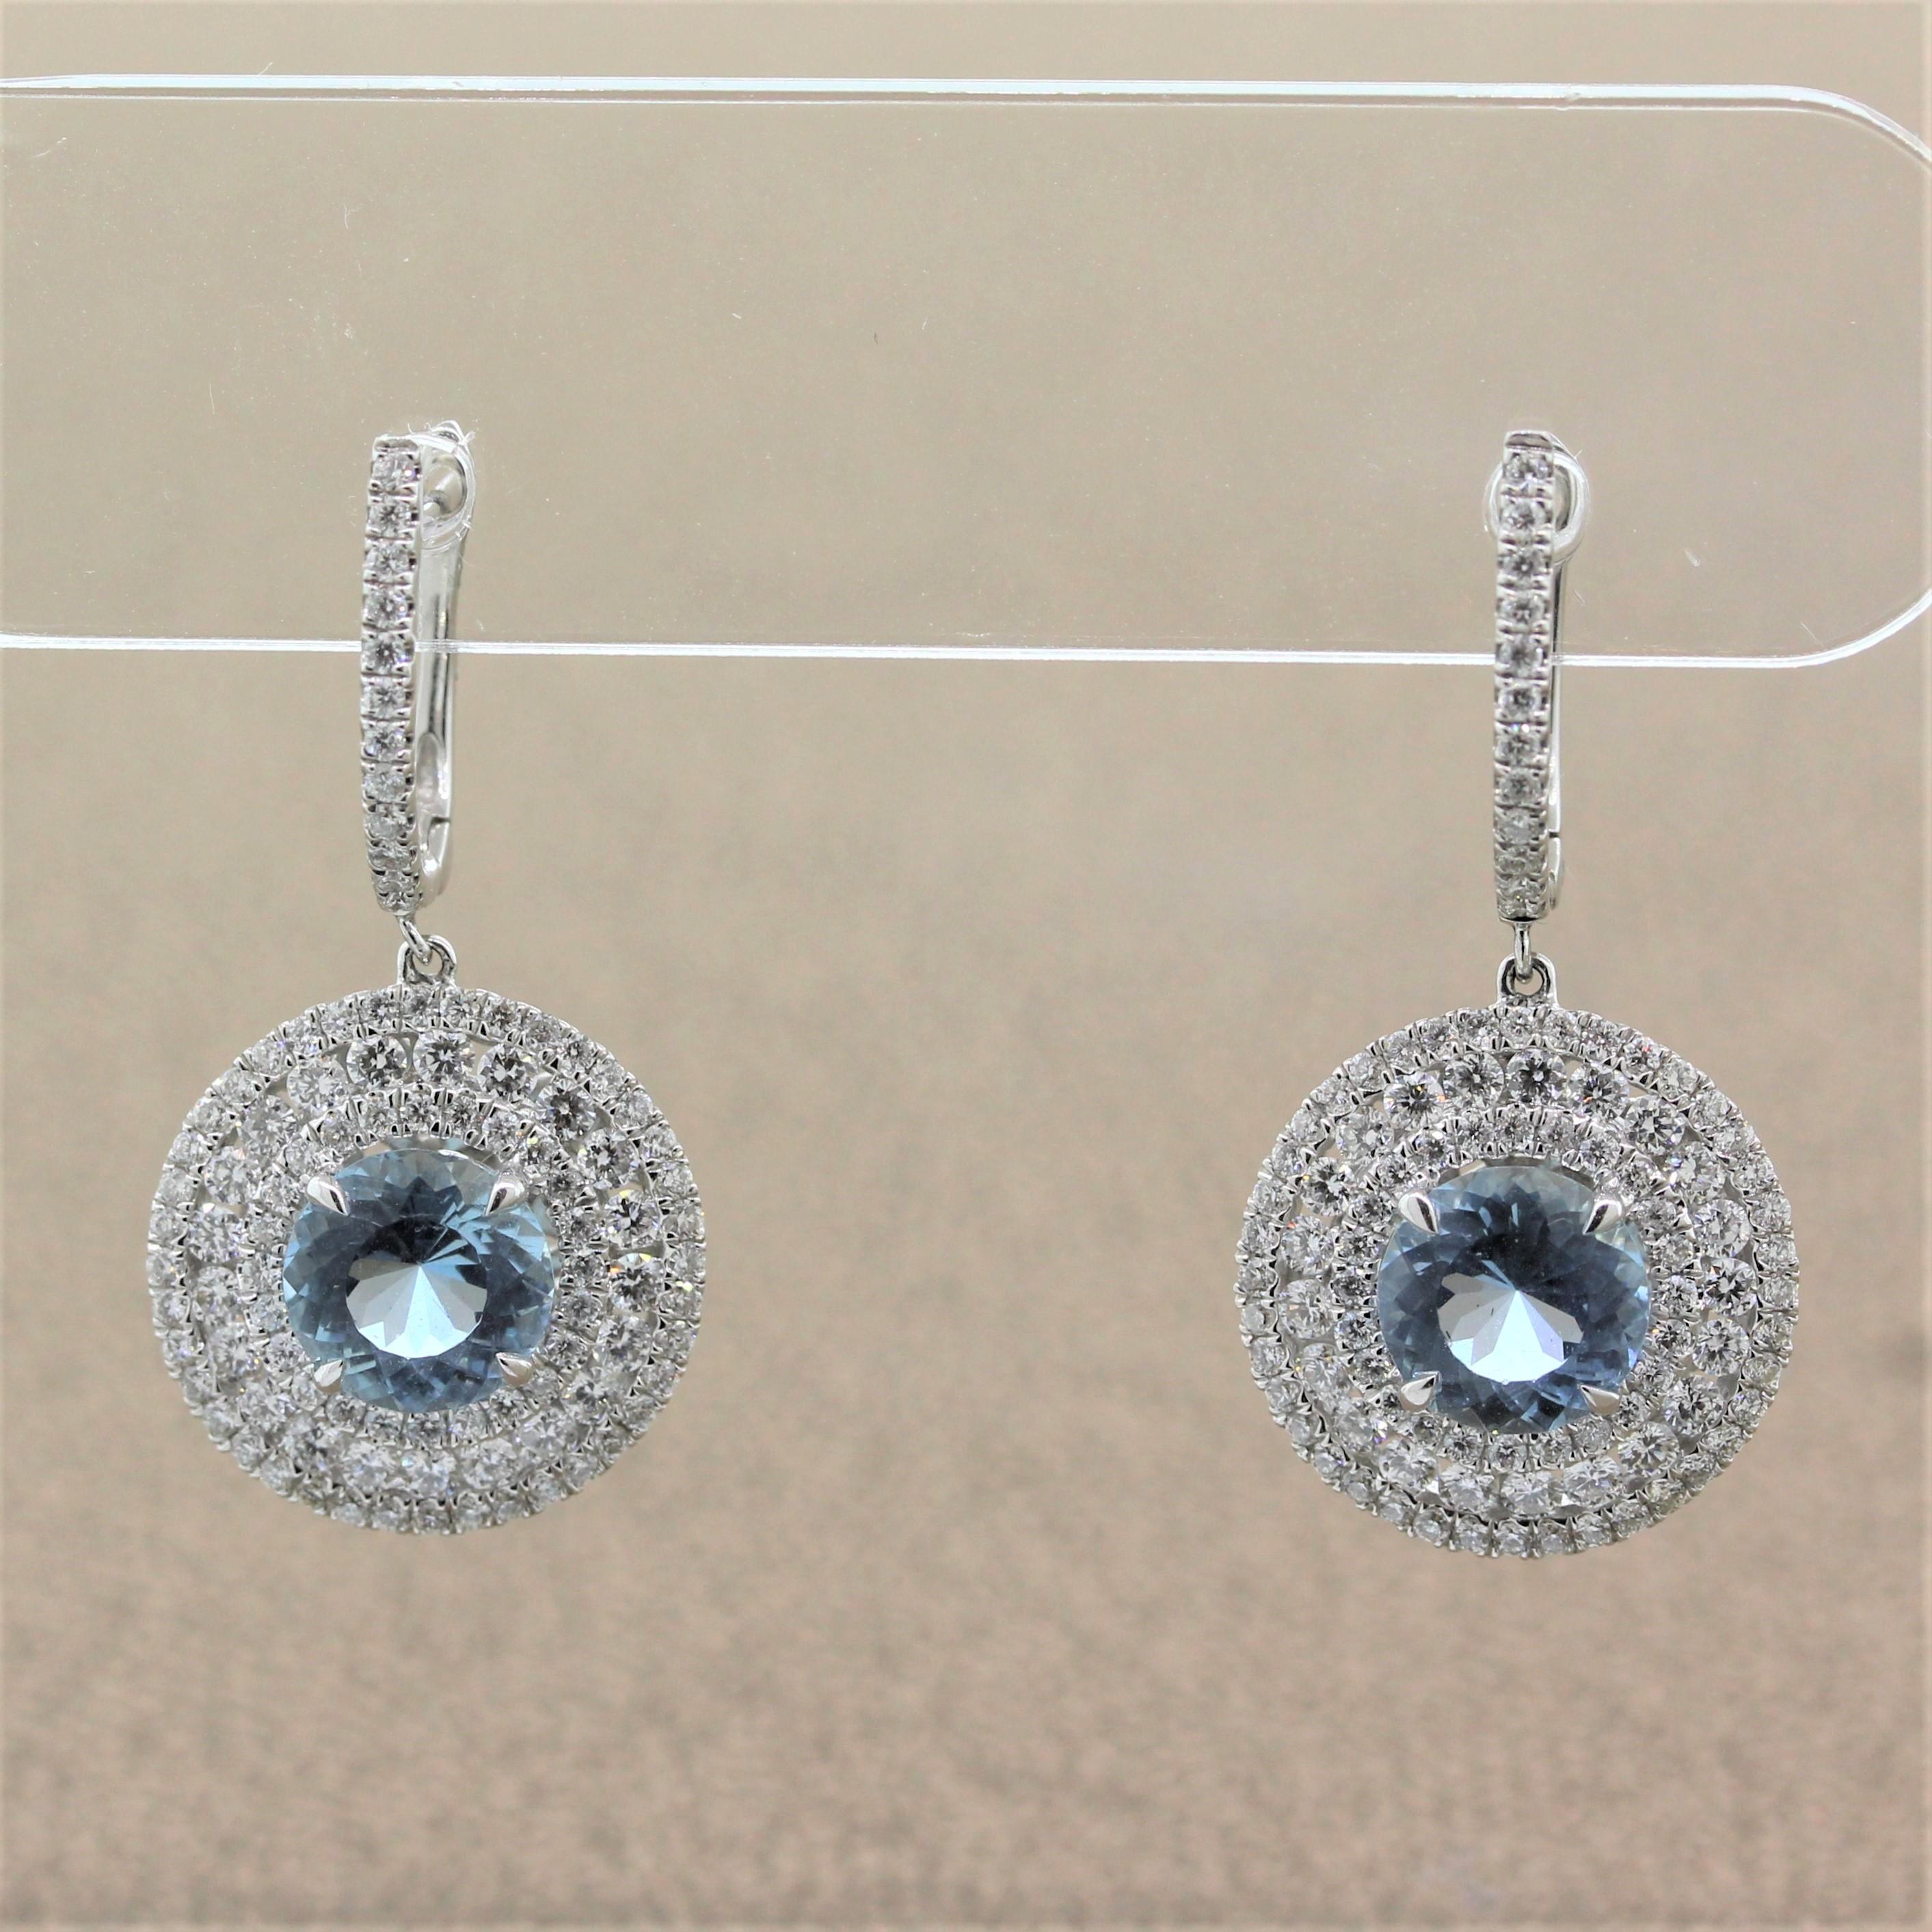 A graceful pair of drop earrings featuring 2.40 carats of aquamarine. The round cut aquamarines are encircled by a triple halo of round cut diamonds weighing 1.90 carats. Each halo of this 18K white gold earring has a different size diamond giving